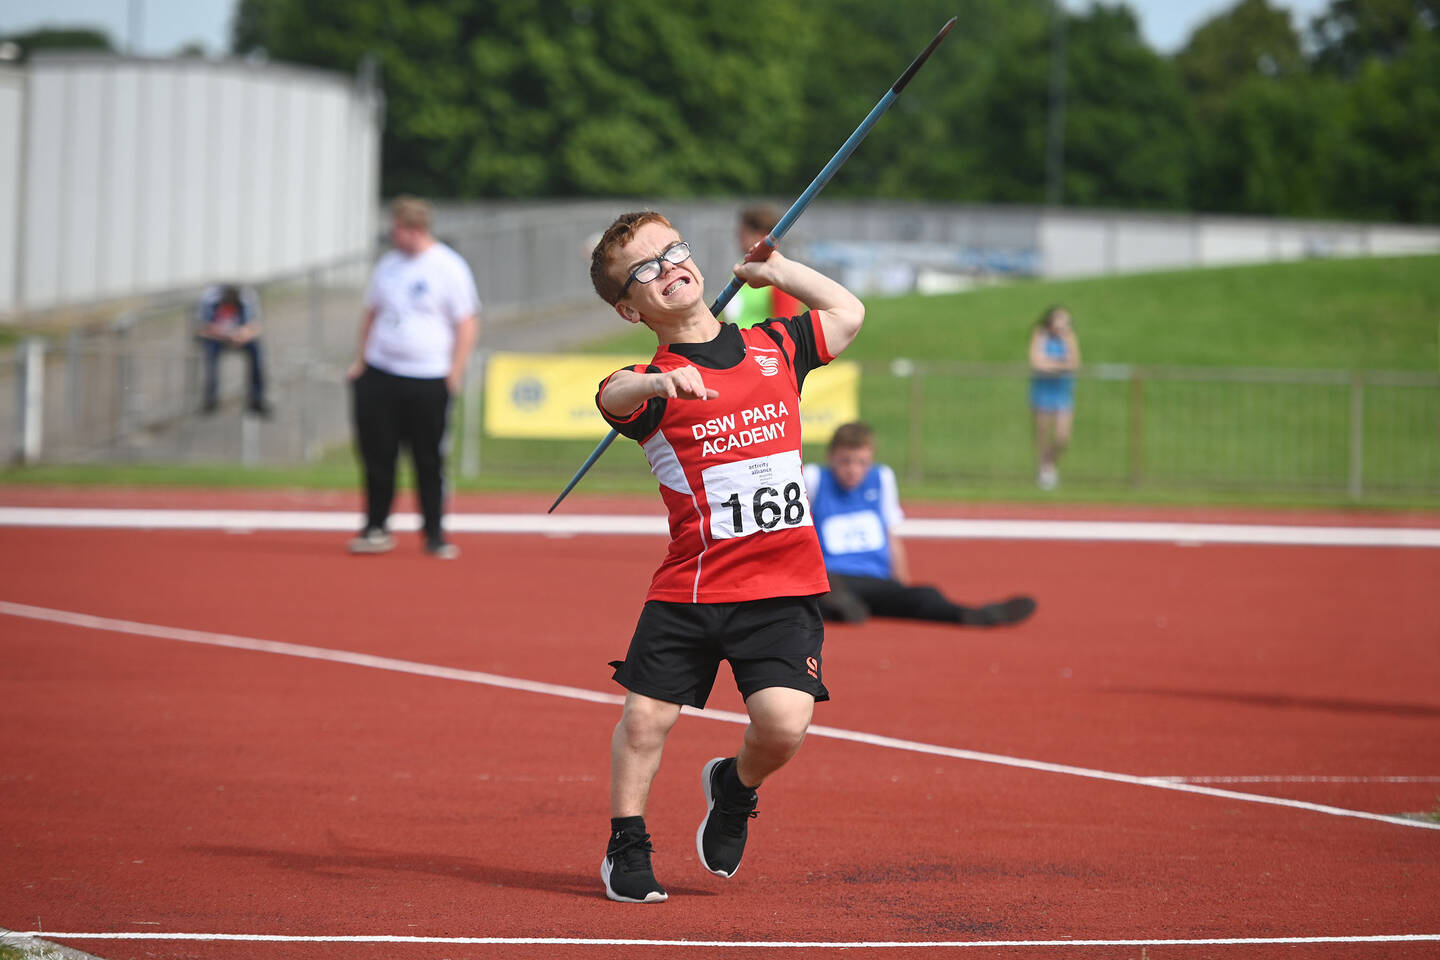 Disability Sport Wales athlete throwing javelin